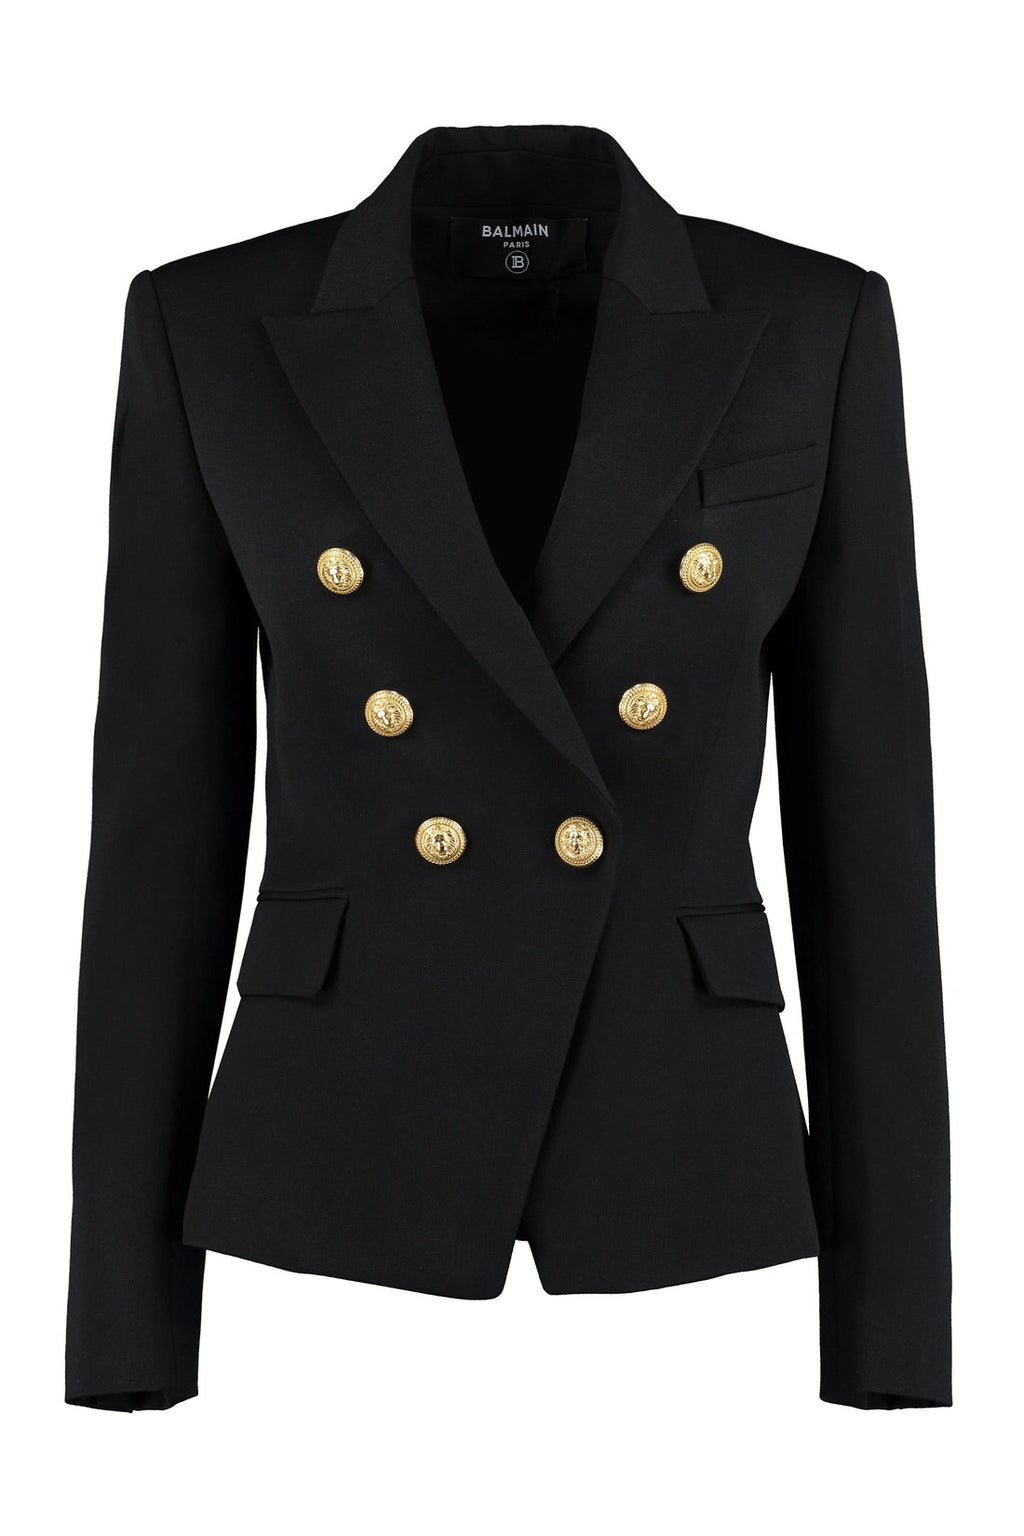 Balmain-OUTLET-SALE-Wool double-breasted blazer-ARCHIVIST